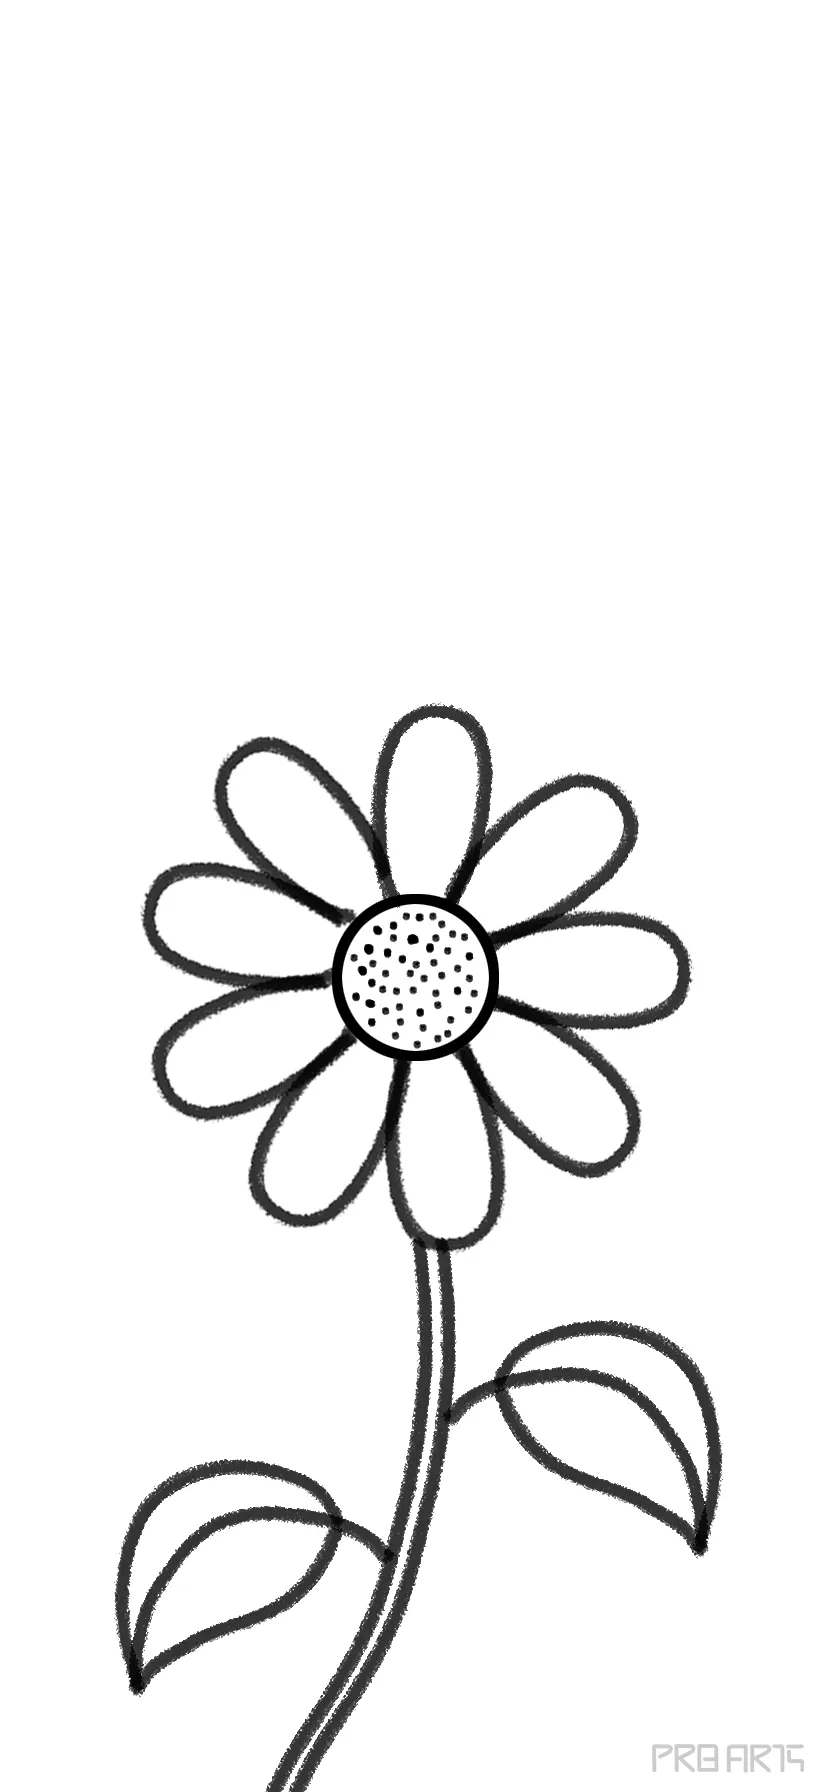 How to Draw a Flower? | Step by Step Drawing for Kids-saigonsouth.com.vn